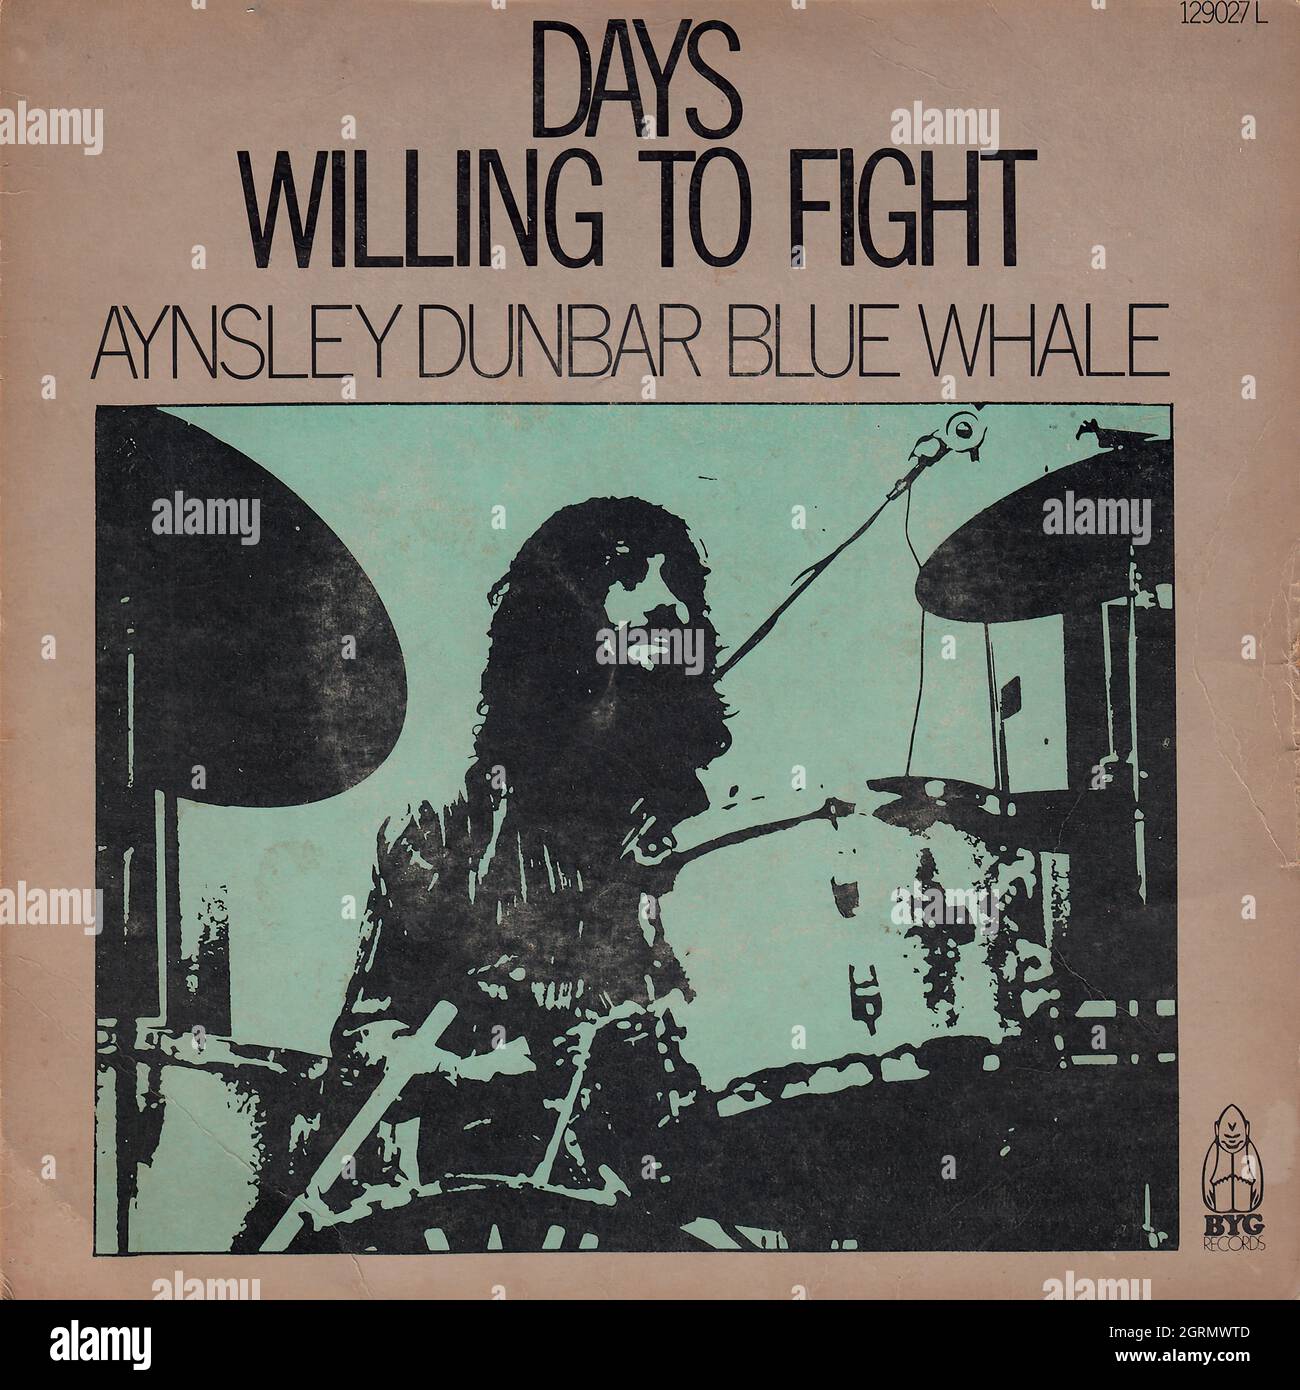 Ansley Dunbar Blue Whale - Days-Willing to fight 45rpm - Vintage Vinyl Record Cover Stock Photo